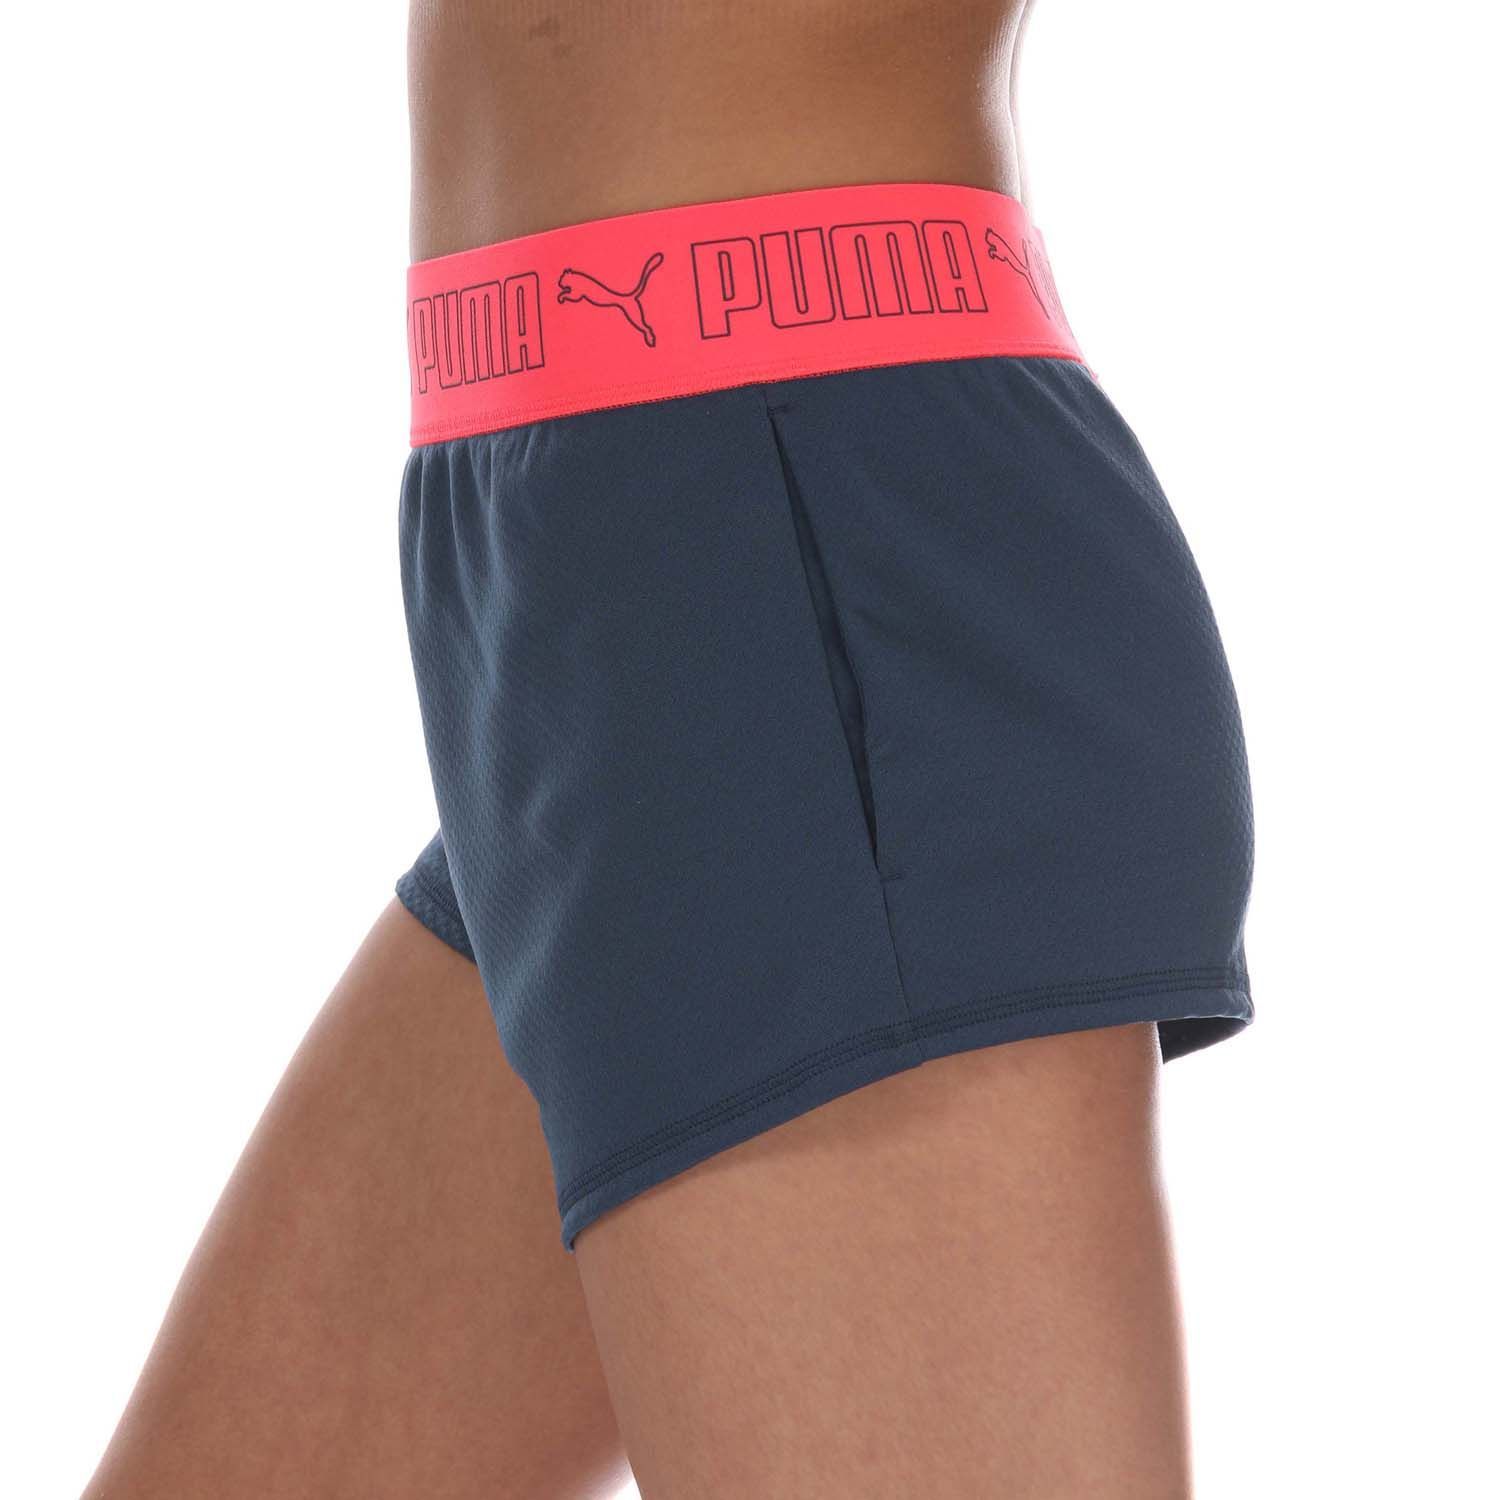 Womens Puma Elastic 3 Inch Training Shorts in dark blue.- Wide elasticated waistband.- Lightweight construction.- Puma branding to the waistband and leg.- Shell: 100% Polyester.  Machine washable.- Ref:52028566